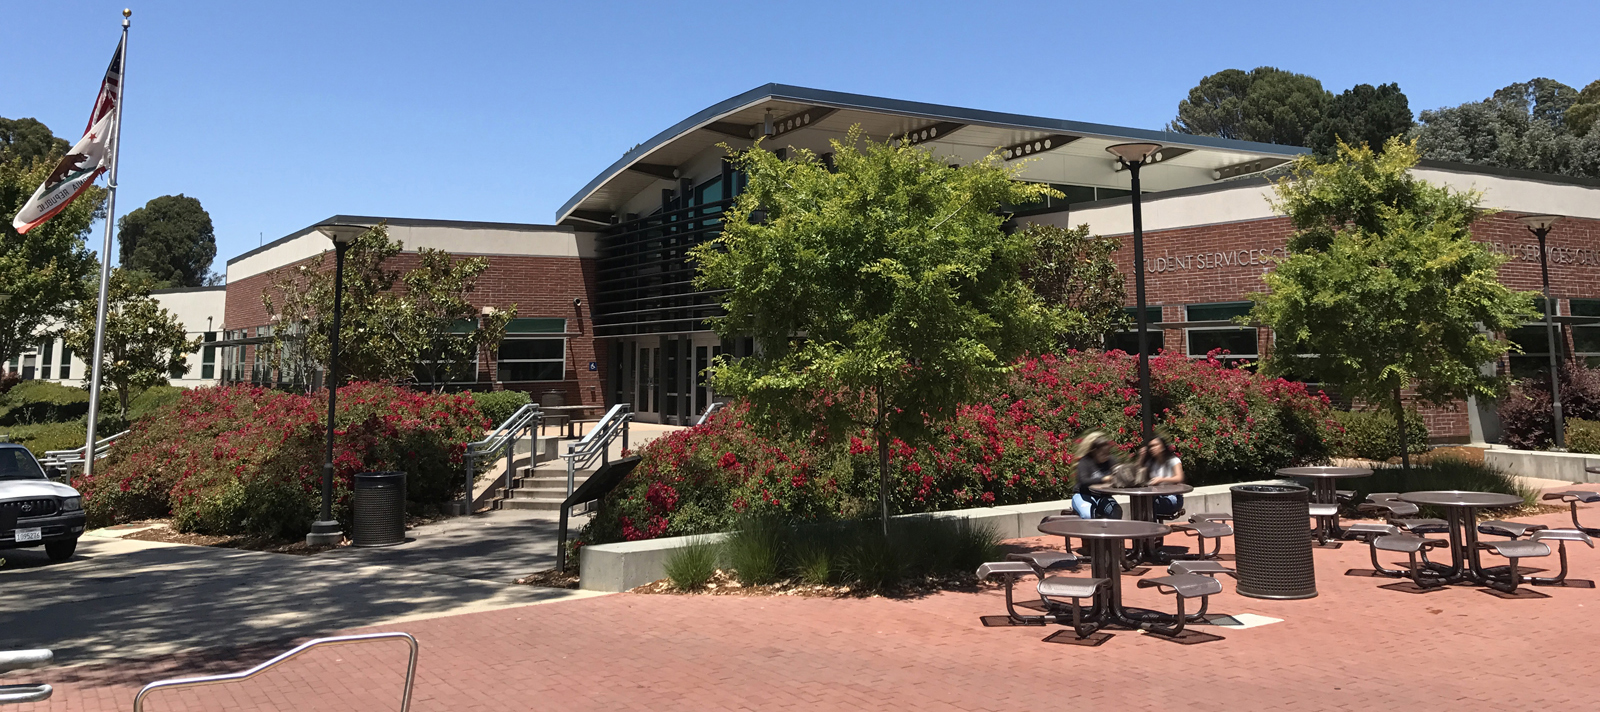 Higher Education, Community College, Contra Costa Community College, Interactive Resources, interior design, San Pablo, space planning, structural Engineering, Student Services Center, Sustainable Design, architectural